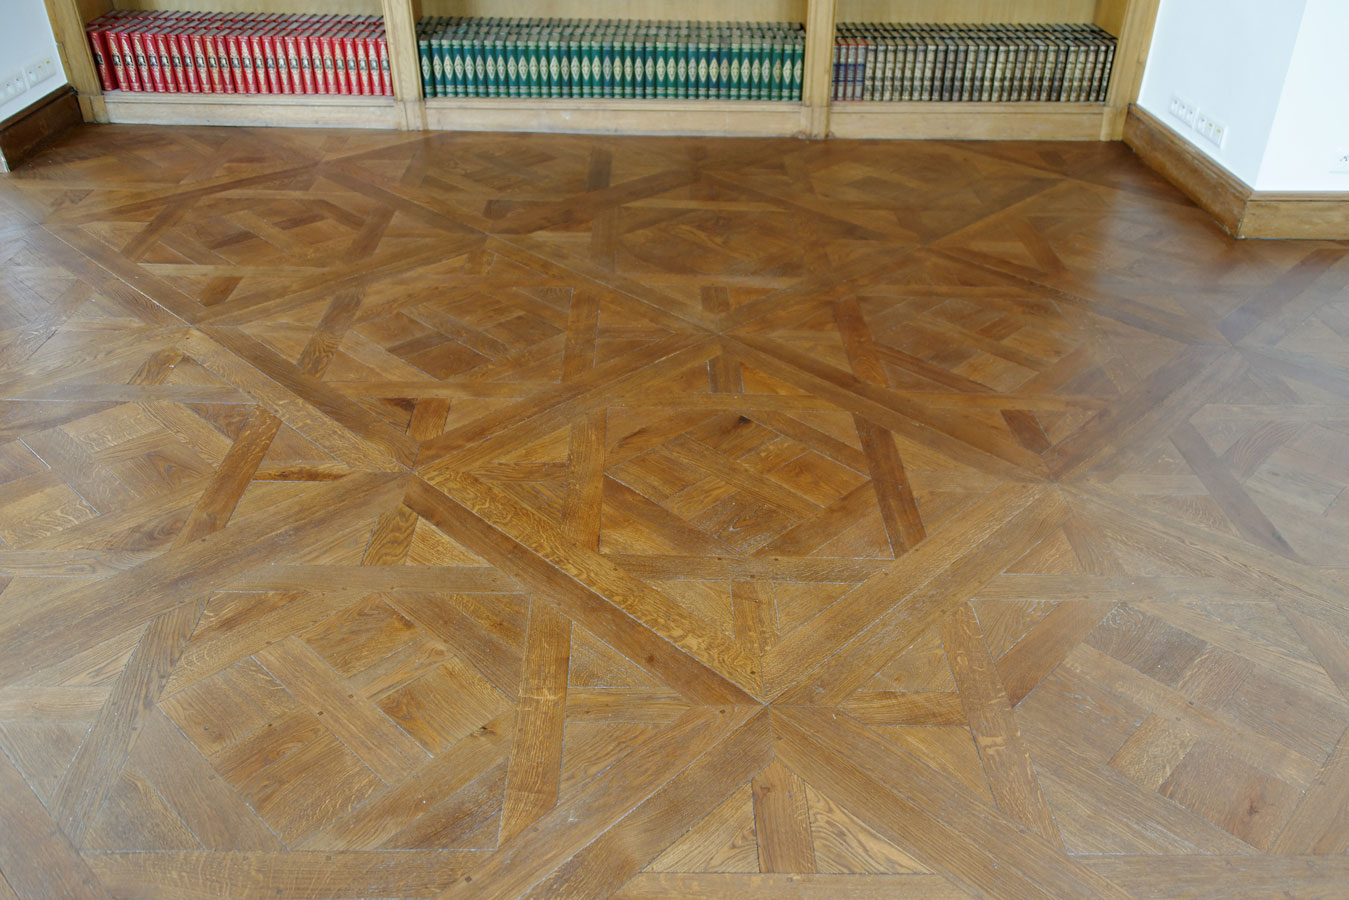 Replica of an old solid oak flooring